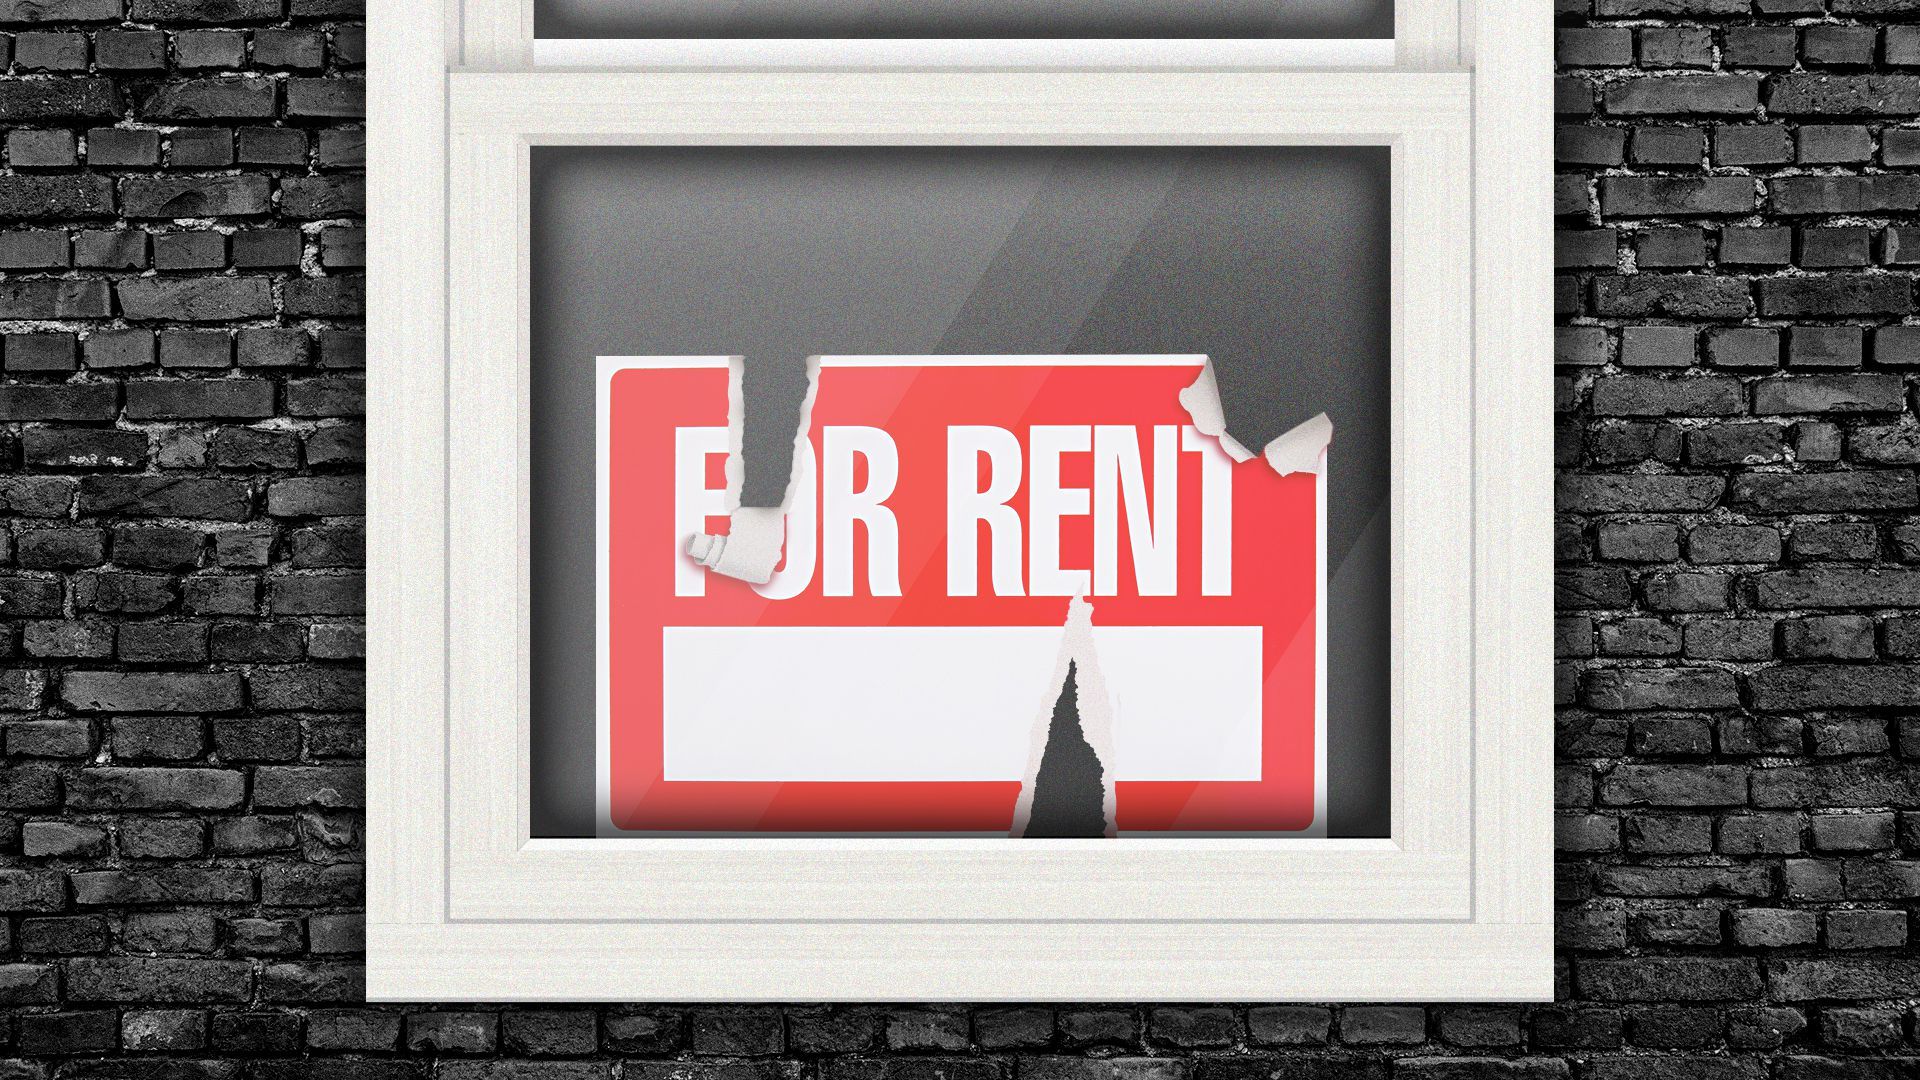 Illustration of a "For Rent" sign in a window, the sign is torn in several places.